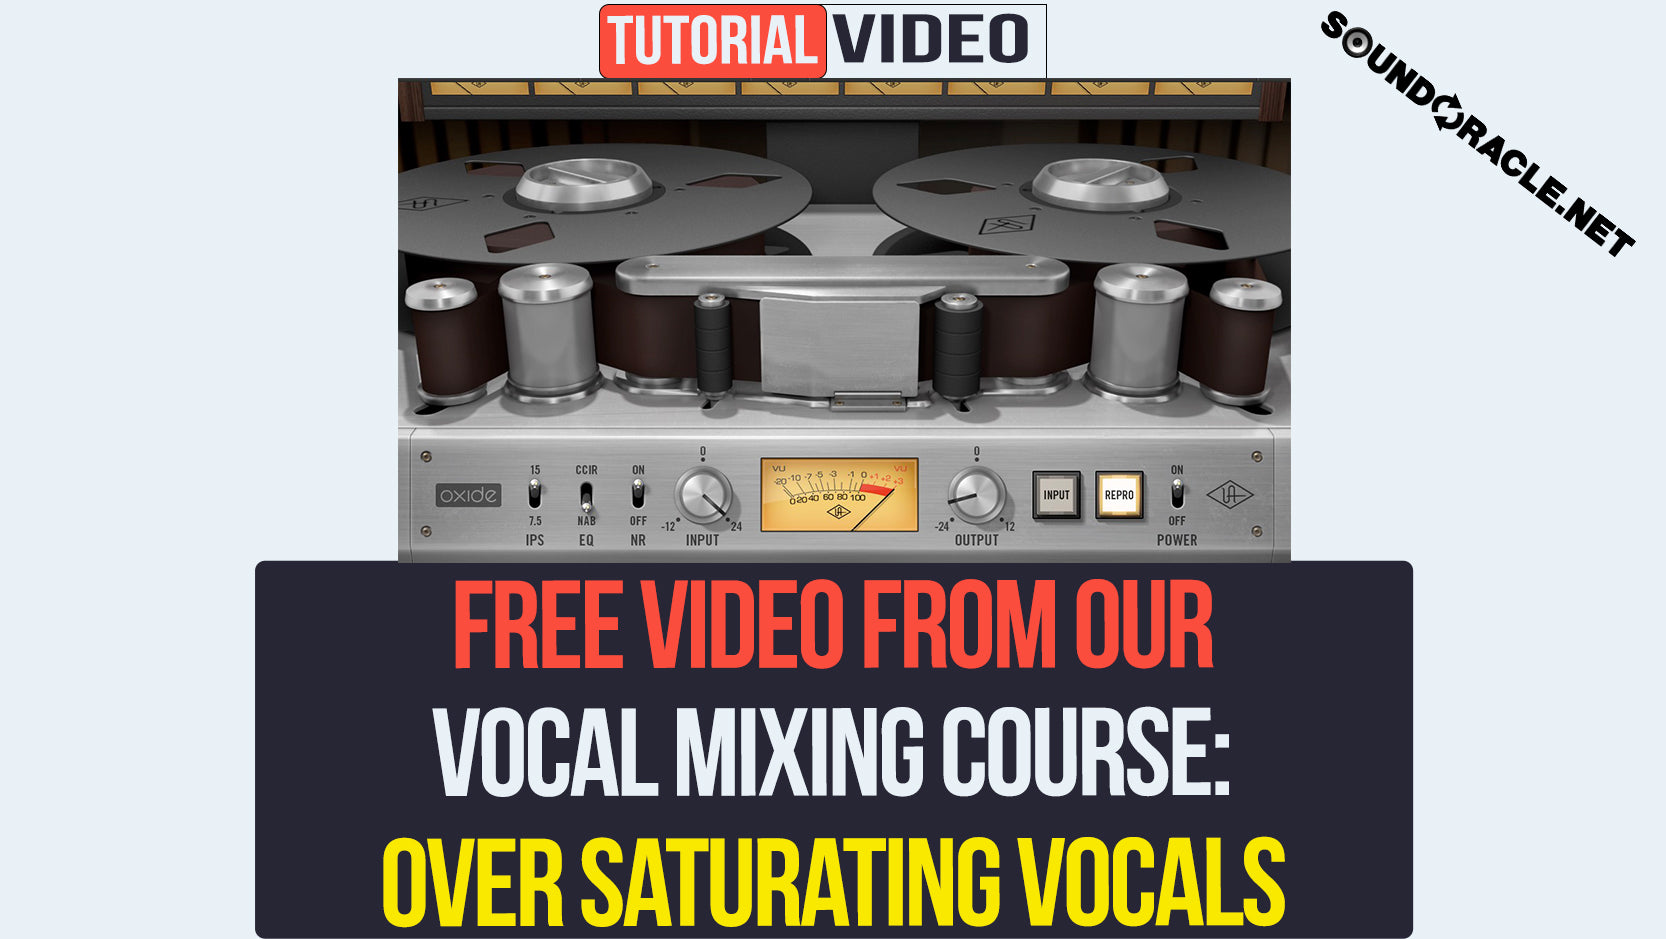 Free Course Video: Over Saturating Vocals